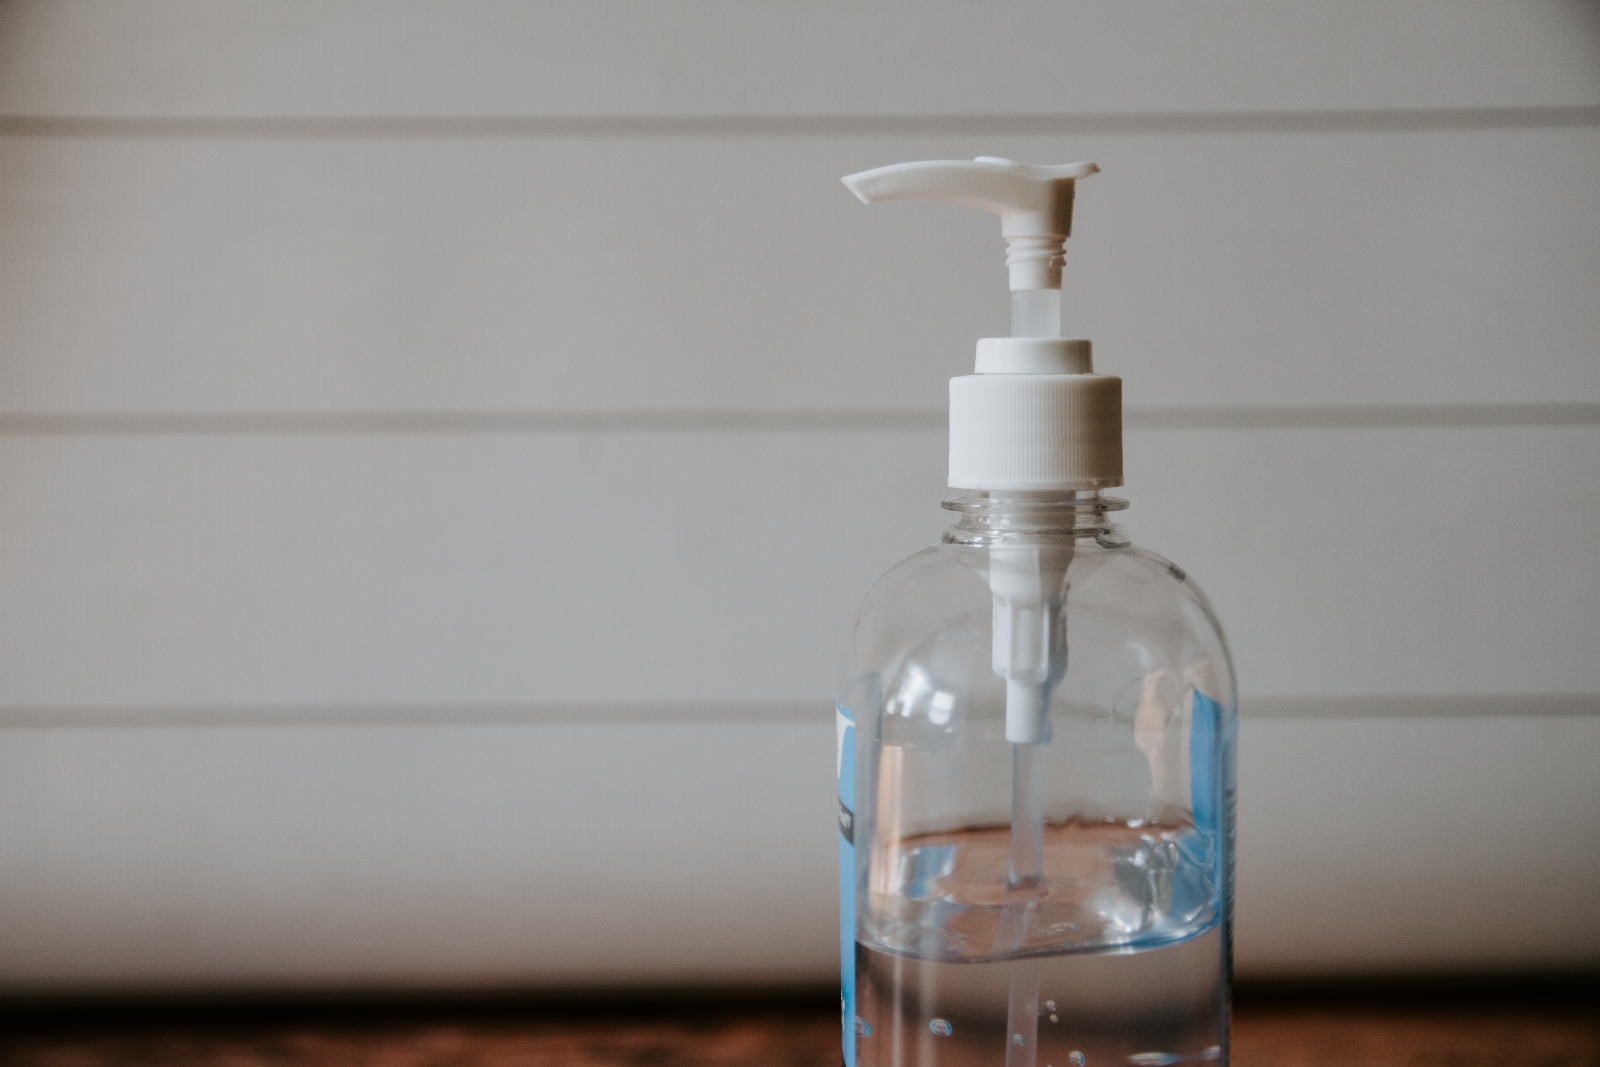 Neptune hires new CFO, gains government approvals to make hand sanitizer